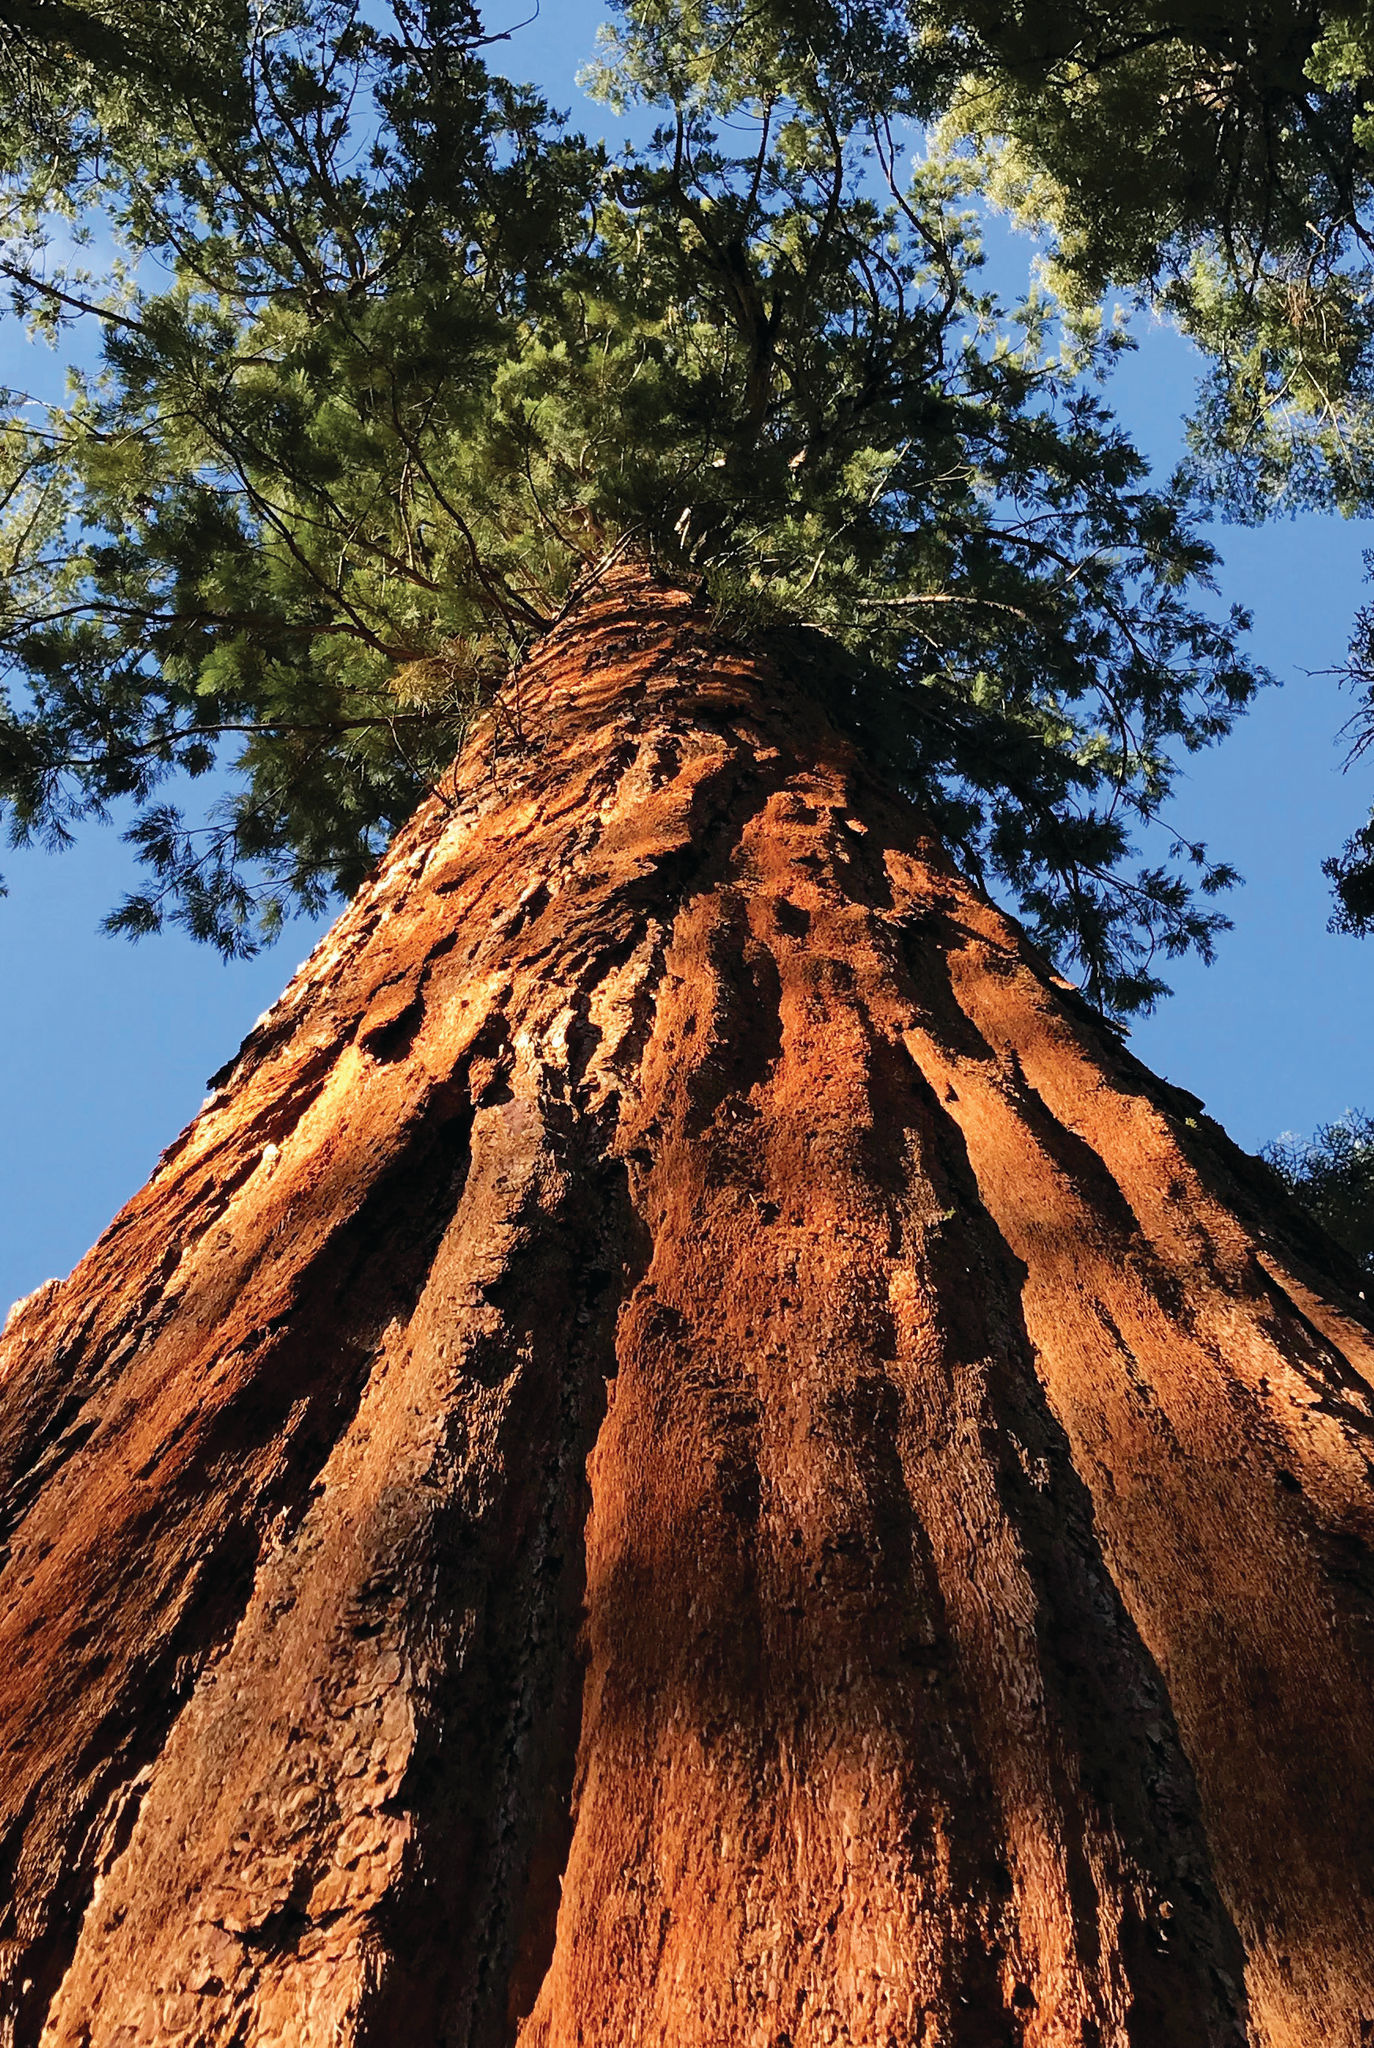 Looking up a giant sequoia